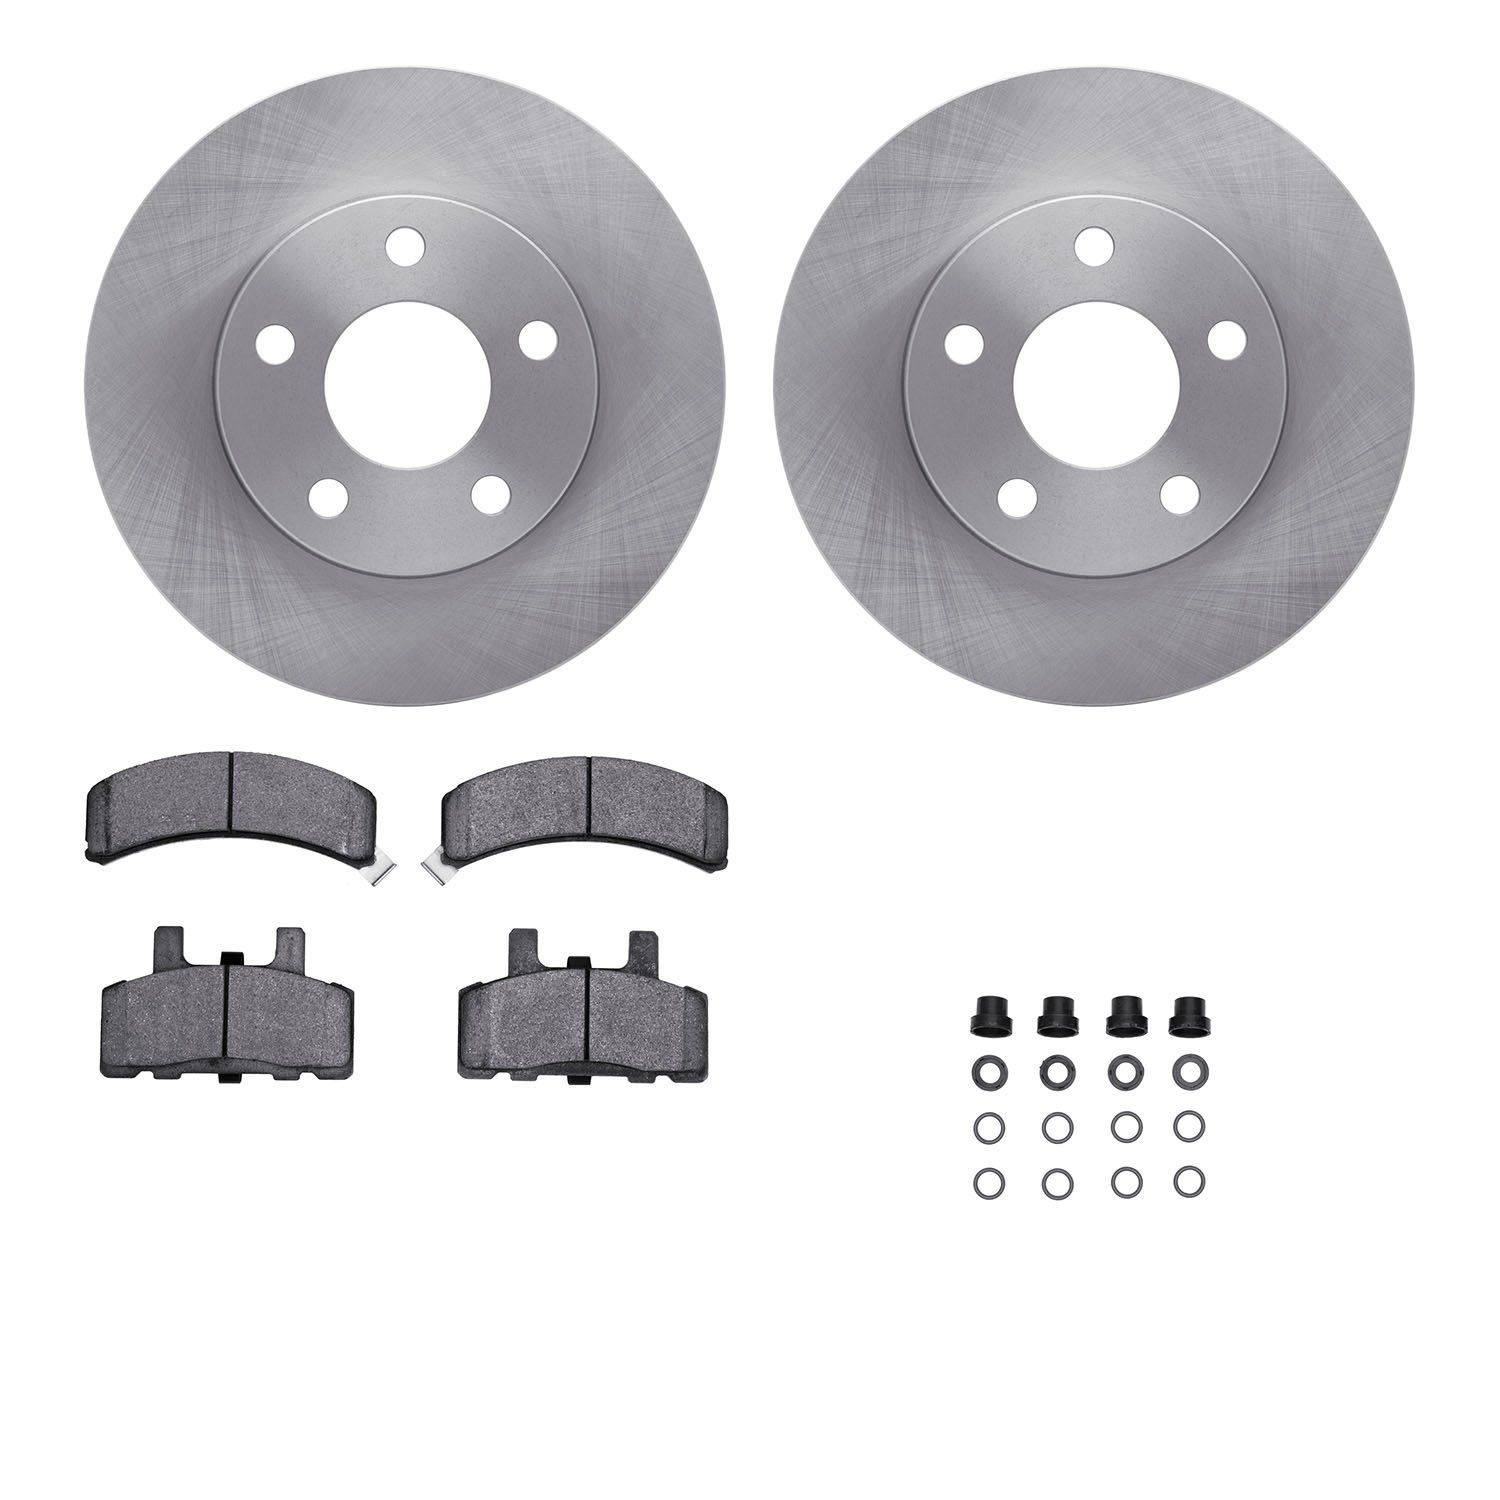 6412-47019 Brake Rotors with Ultimate-Duty Brake Pads Kit & Hardware, 1990-1993 GM, Position: Front